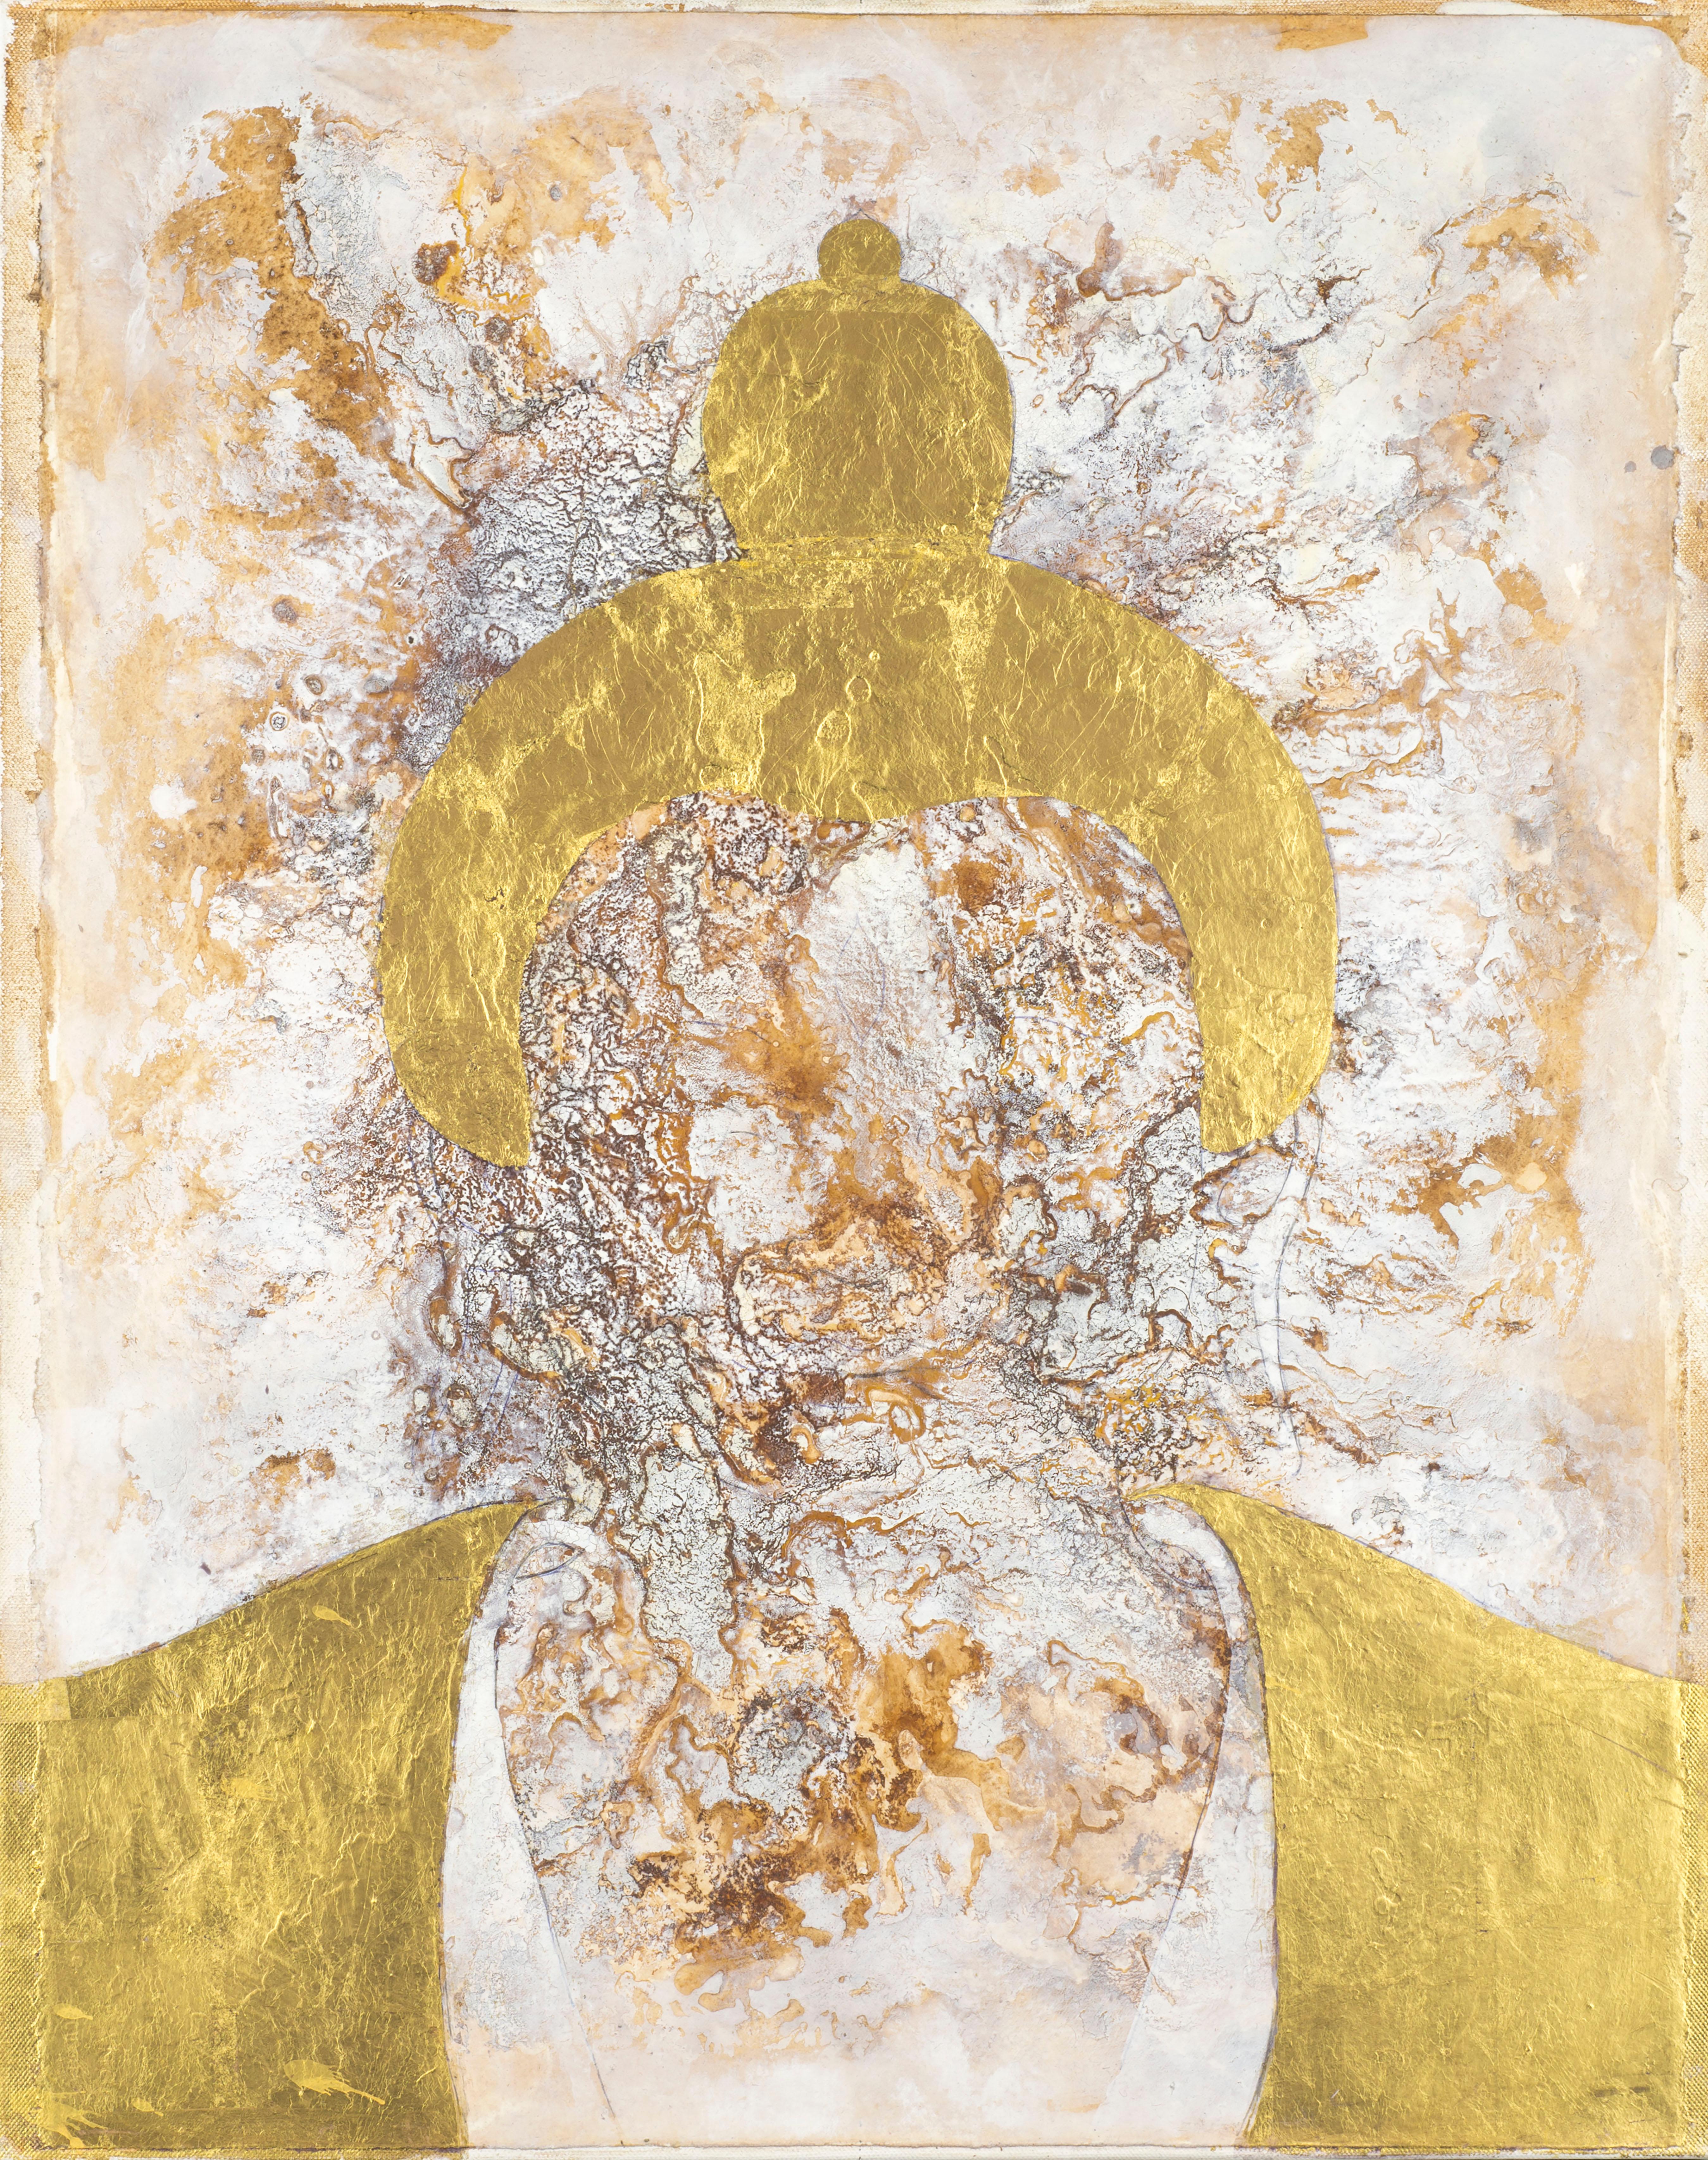 Sax Berlin Abstract Painting - Golden Buddha:  Oil and Gold Leaf on Canvas